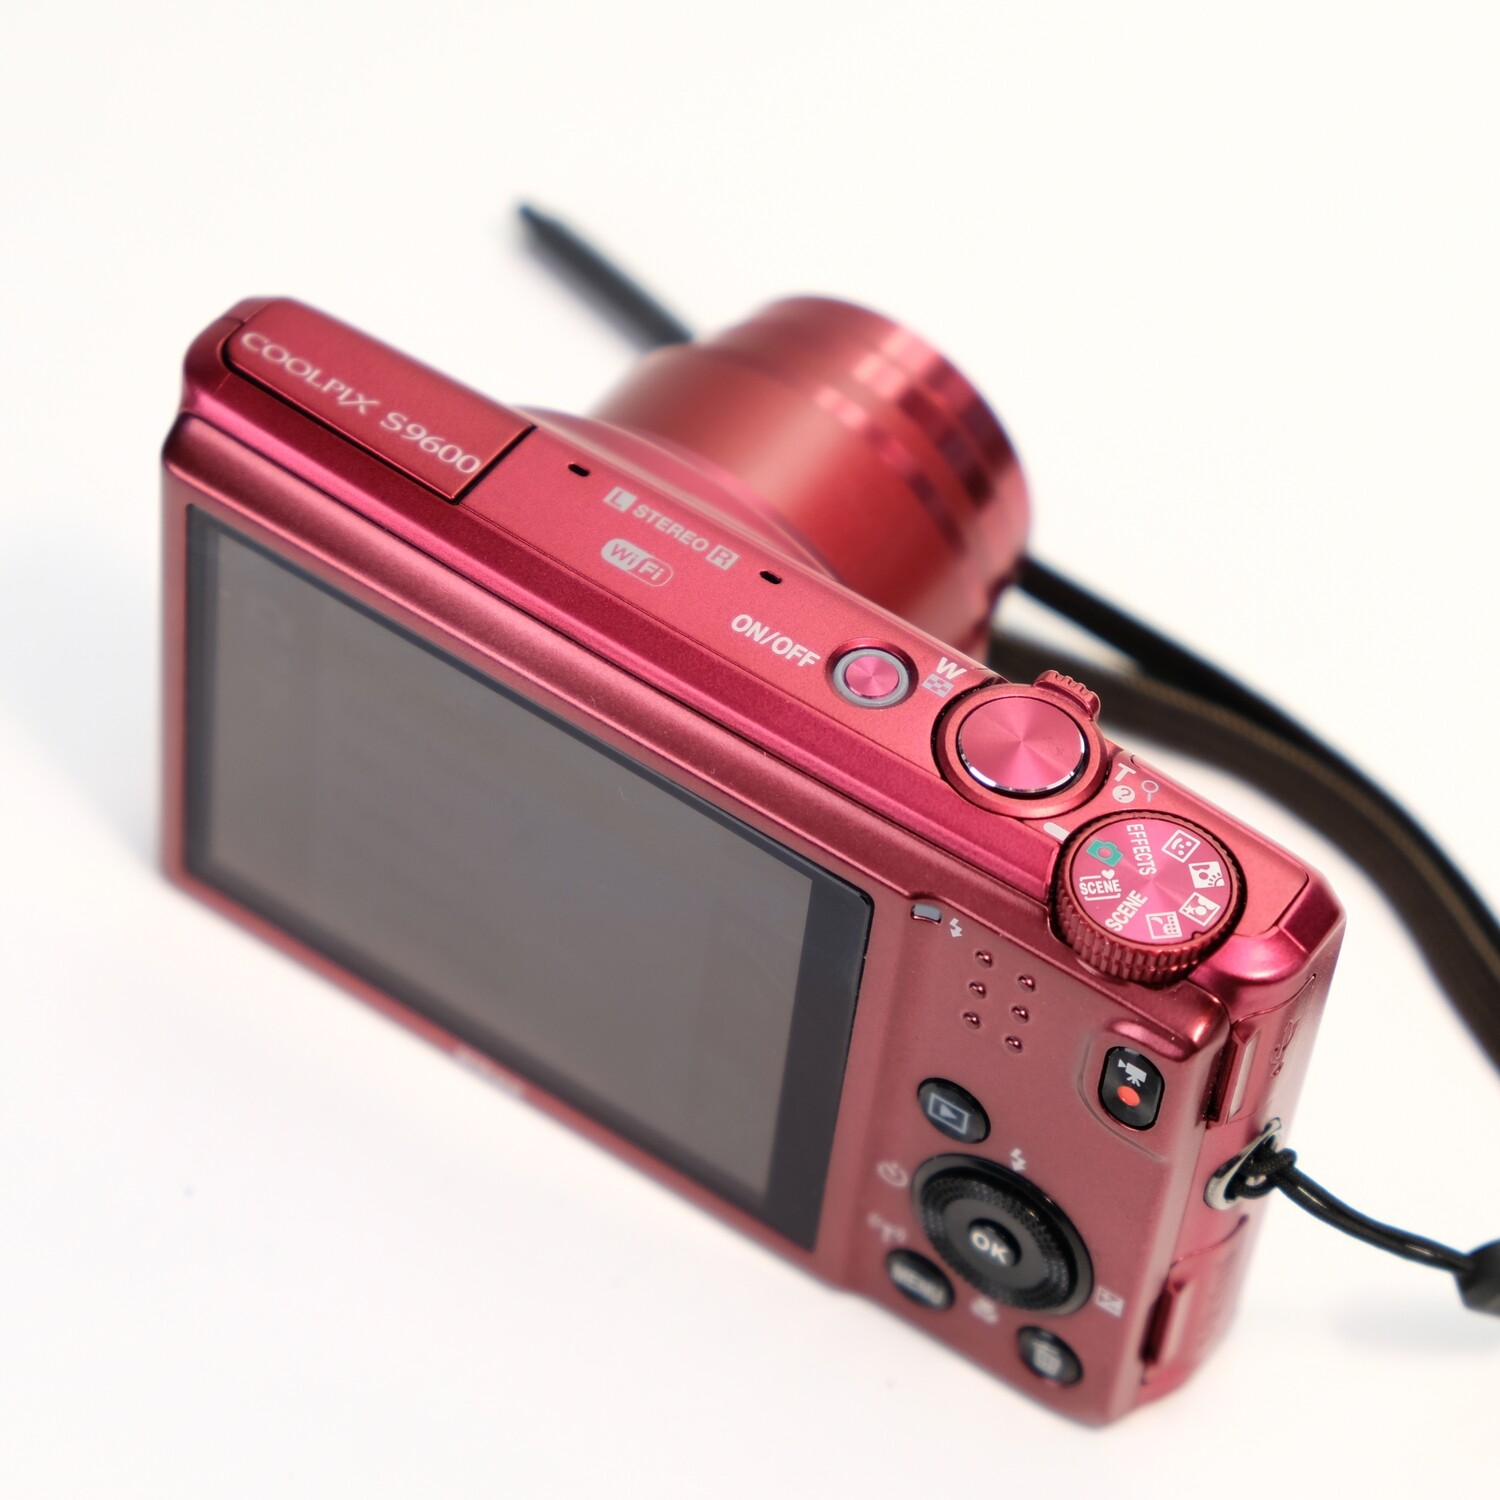 coolpix s9600 wifi